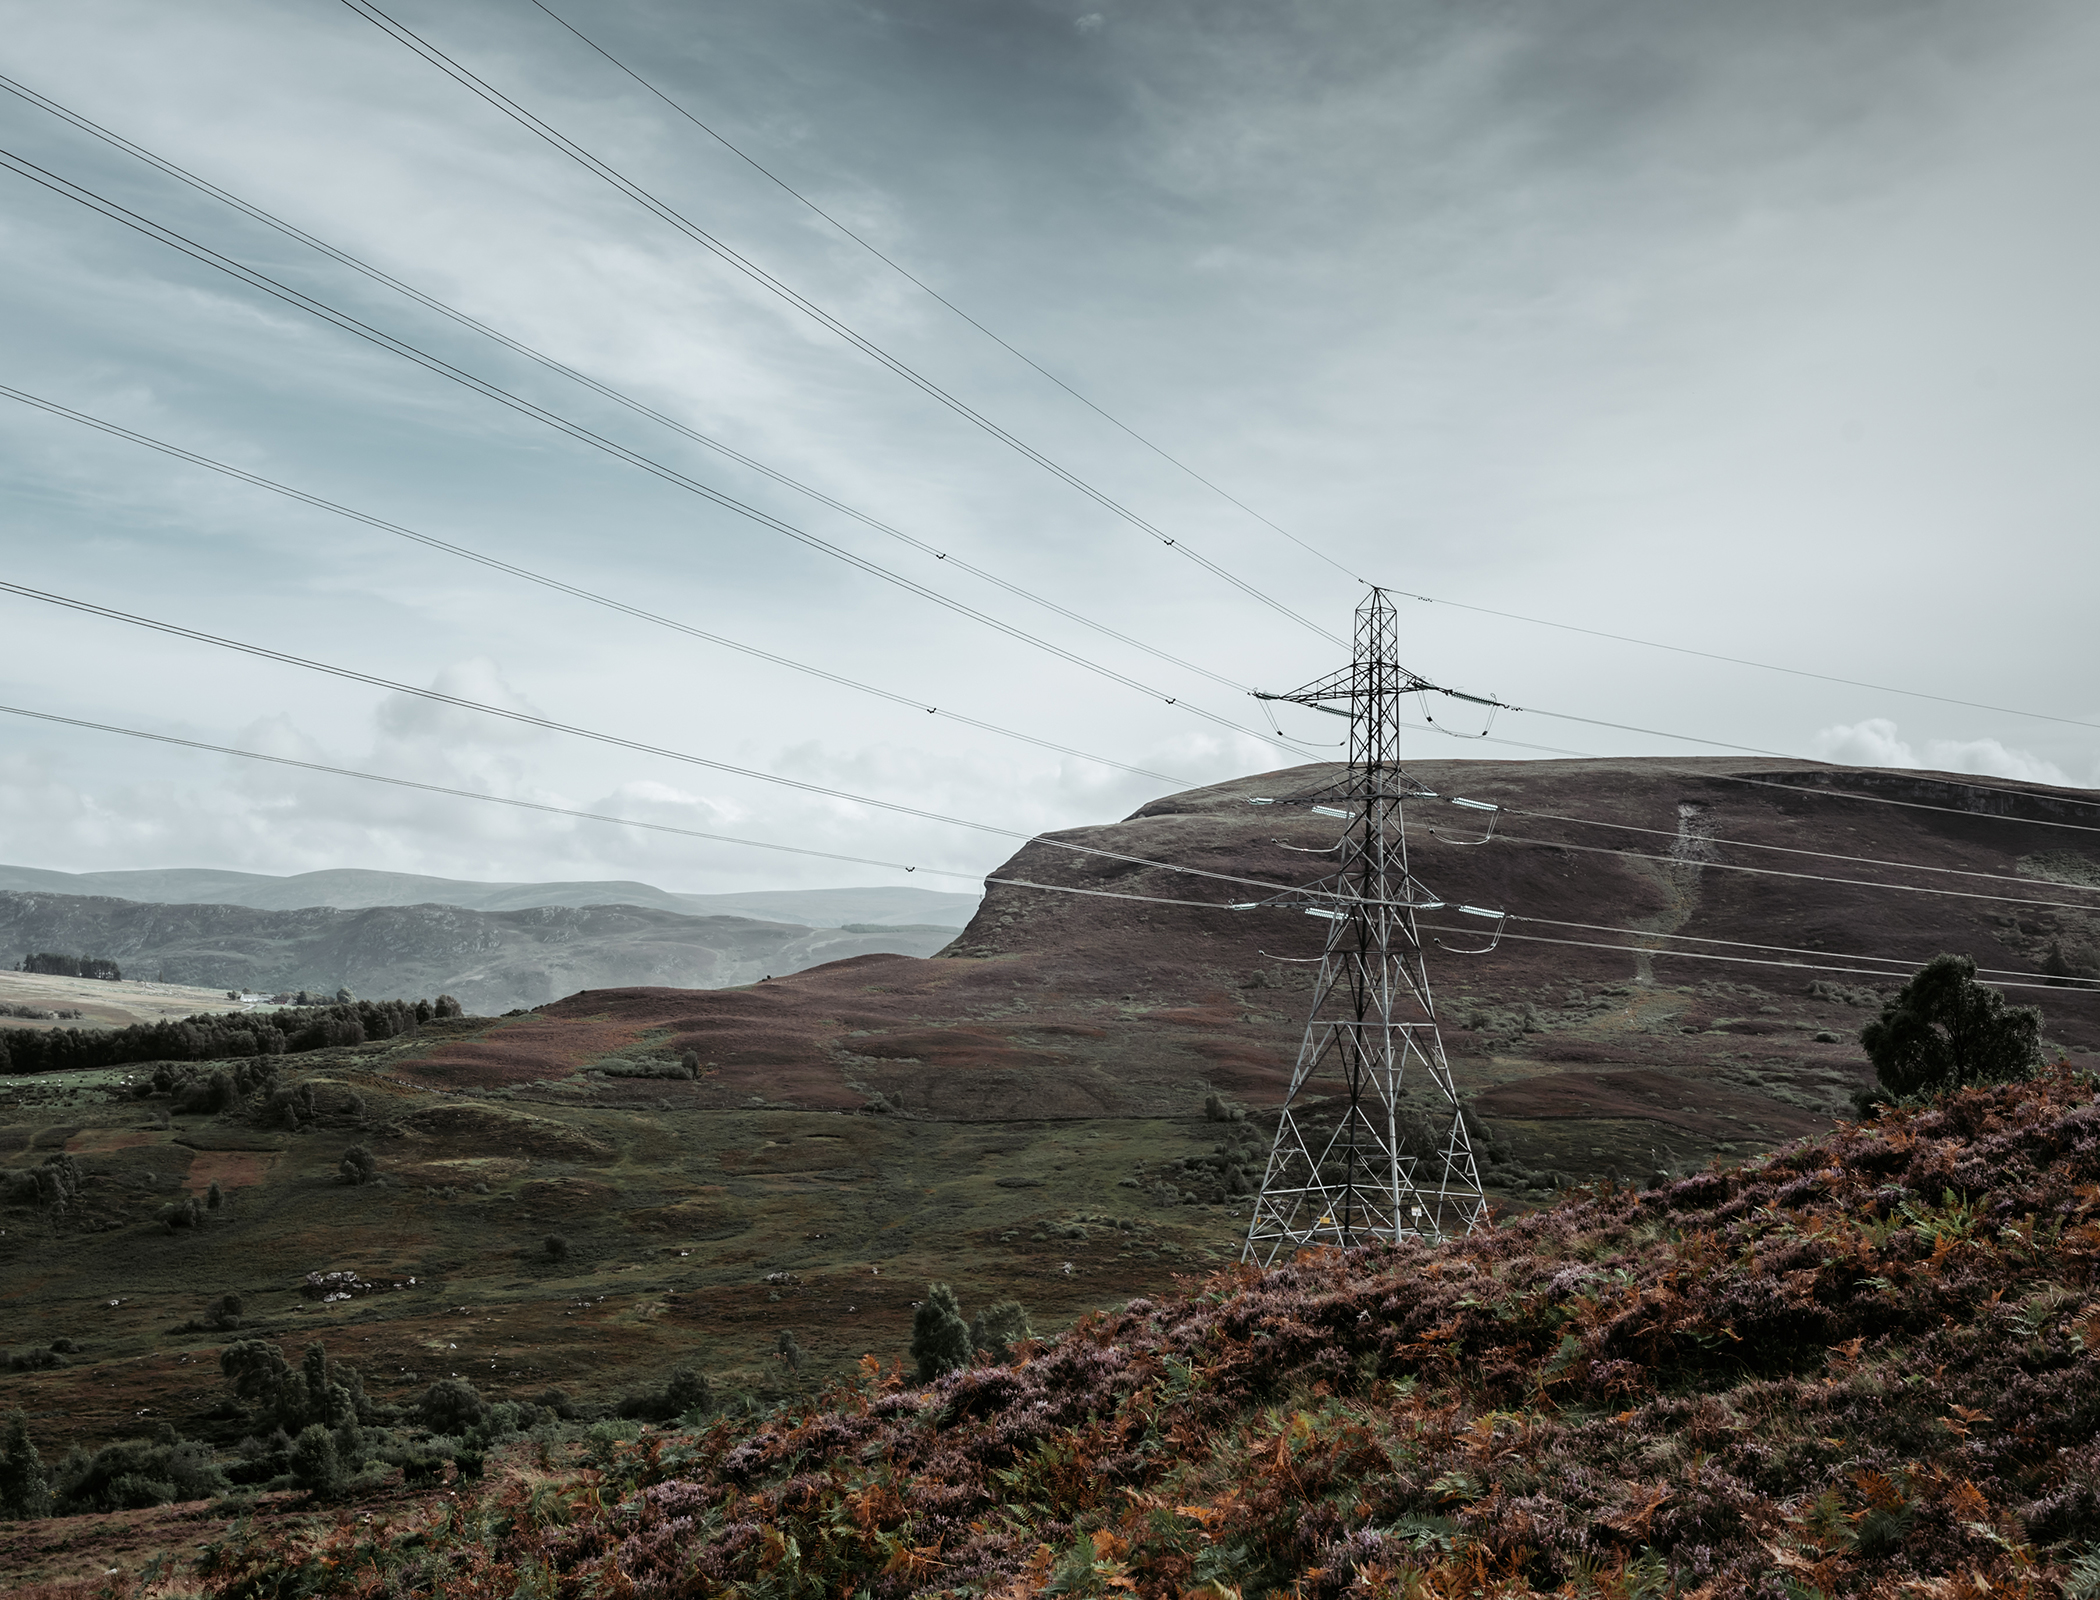 Scotland needs more pylons to support wind power expansion, experts urge